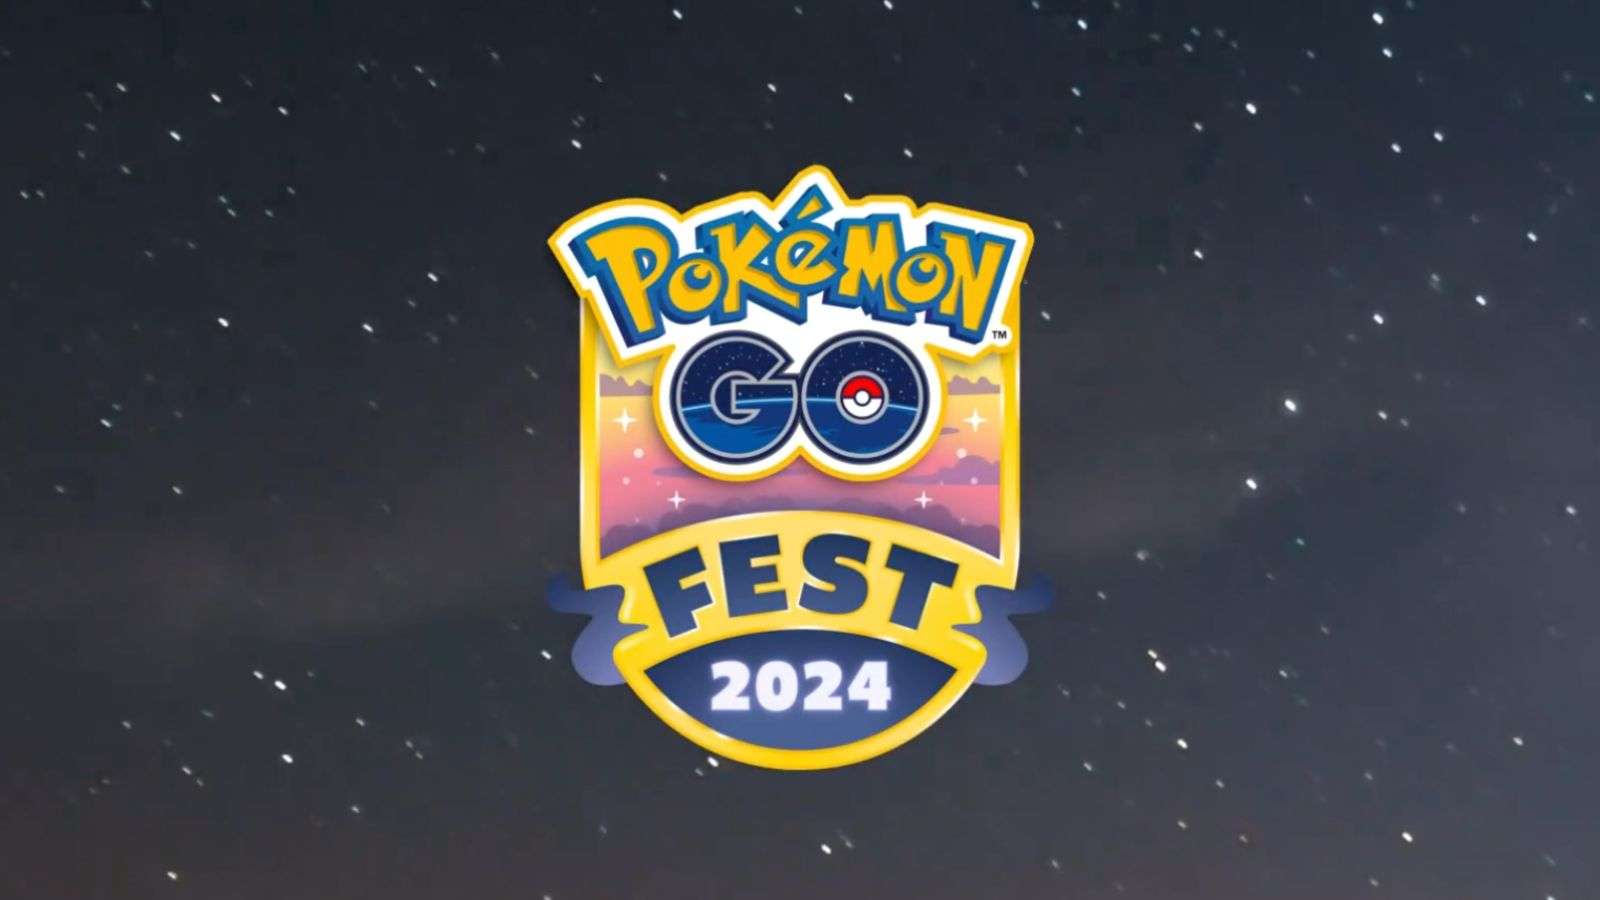 Where to get Pokemon Go Fest 2024 New York tickets Event dates, How to